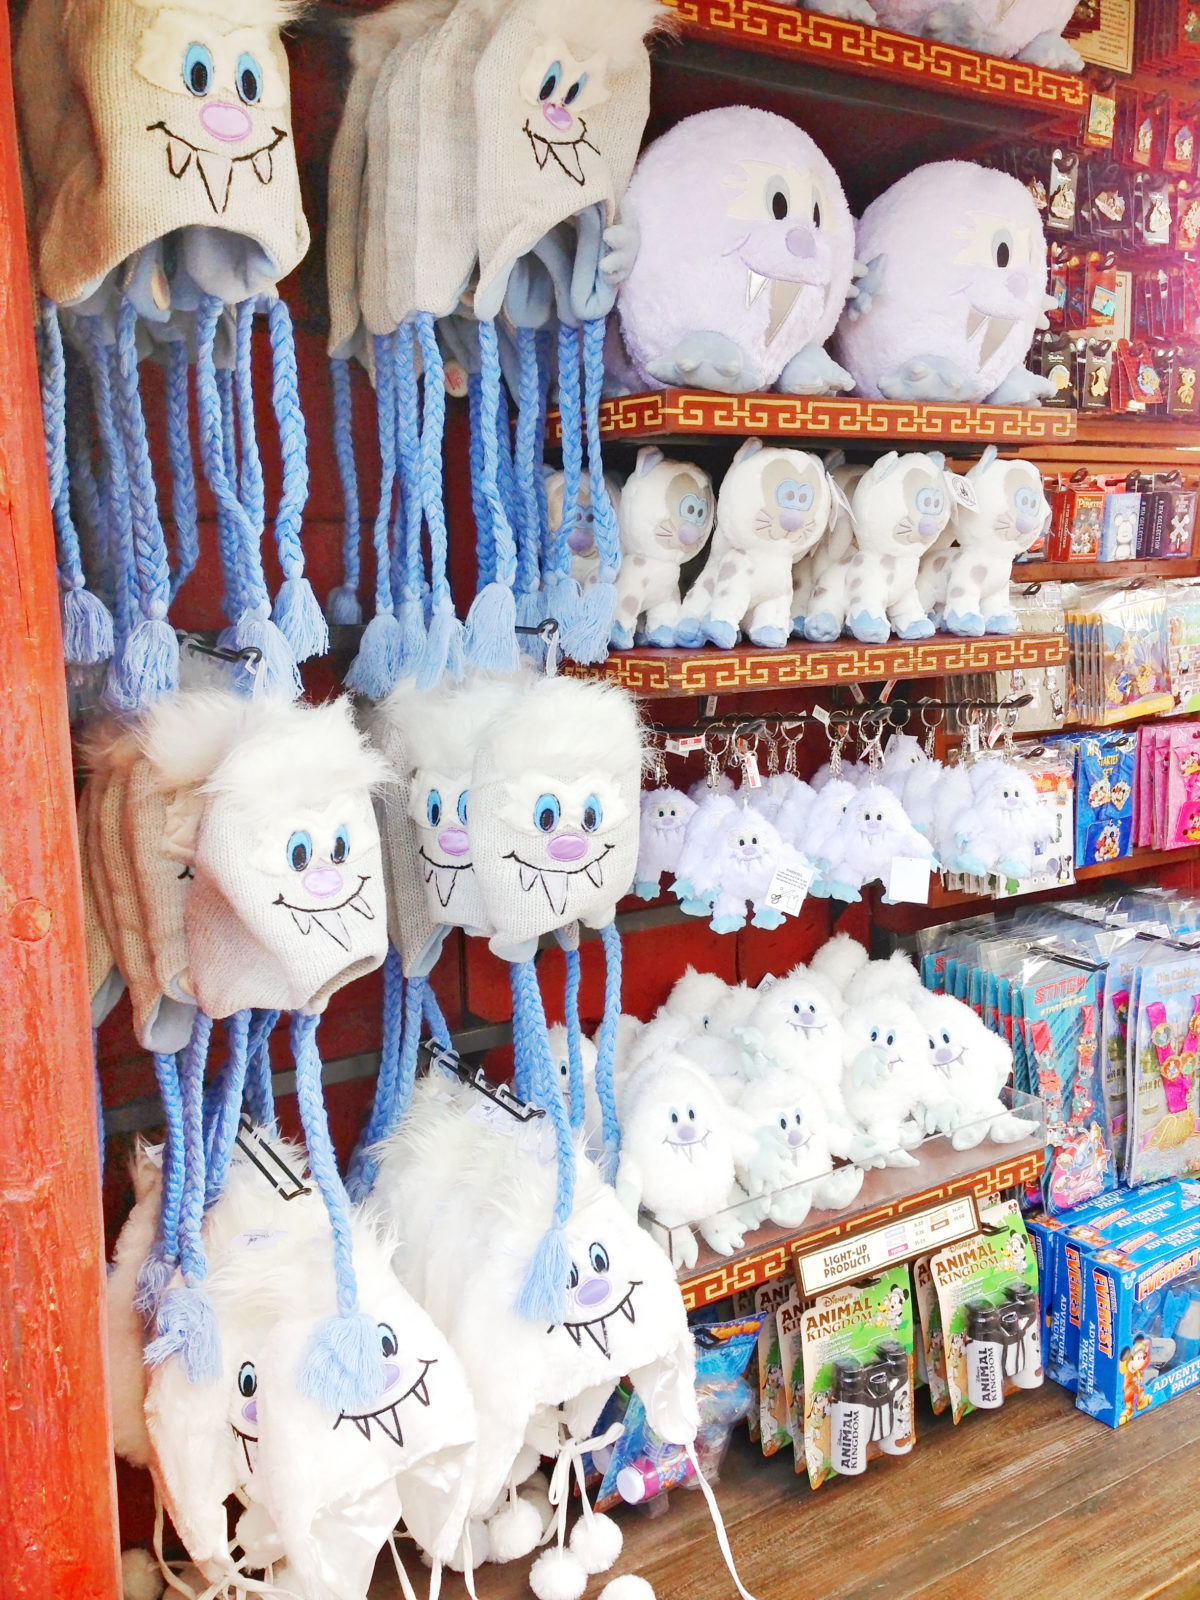 EXPEDITION EVEREST merchandise yeti hats and purses